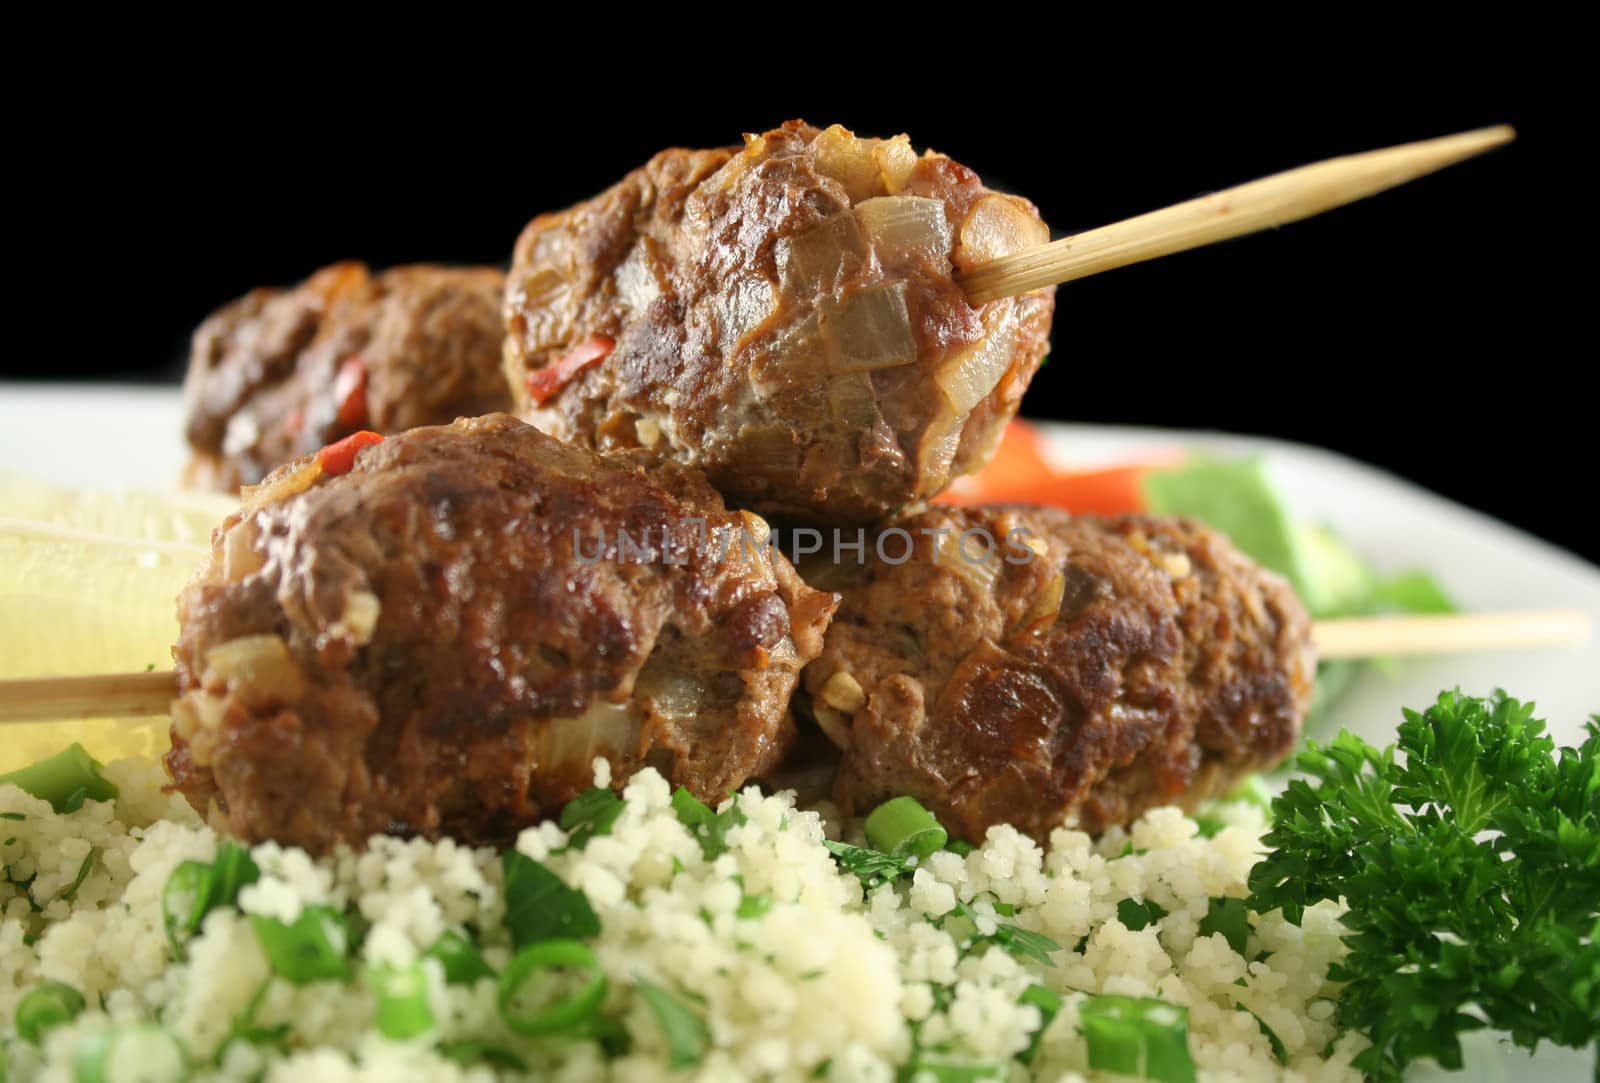 Beef kofta on parsley couscous with a garden salad.